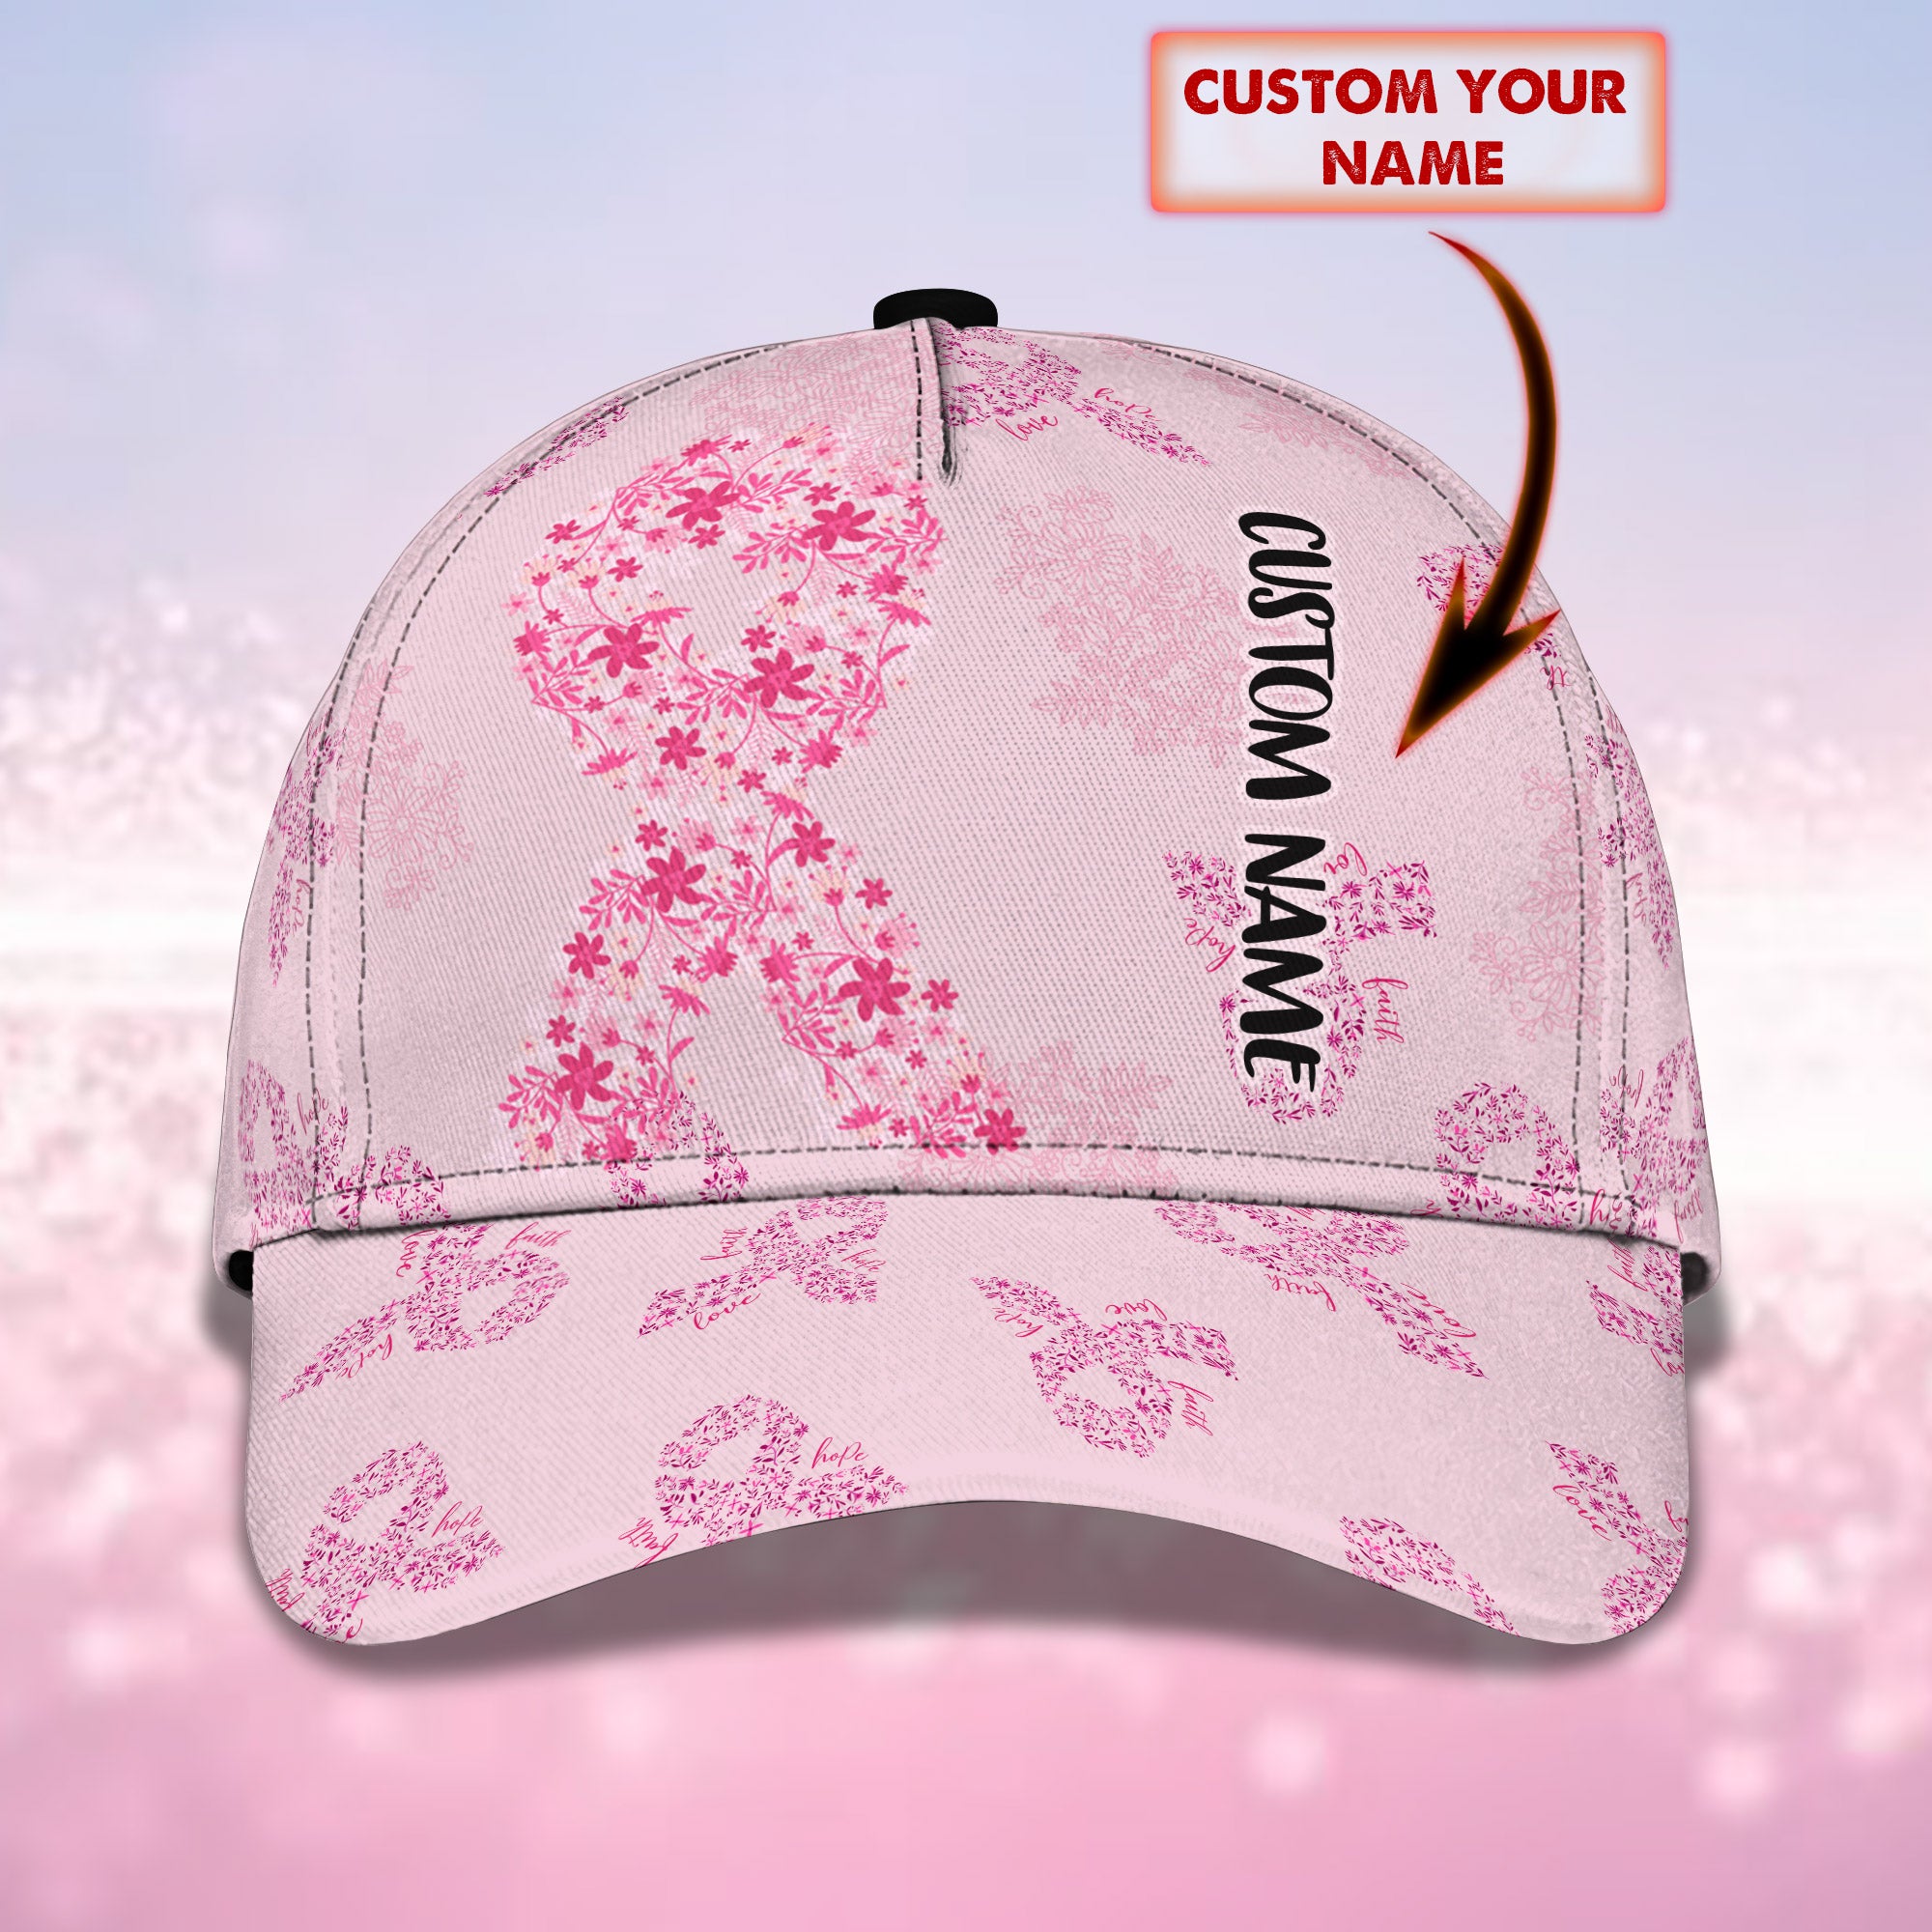 Breast Cancer 2 - Personalized Name Cap - Dp98 - Dp329